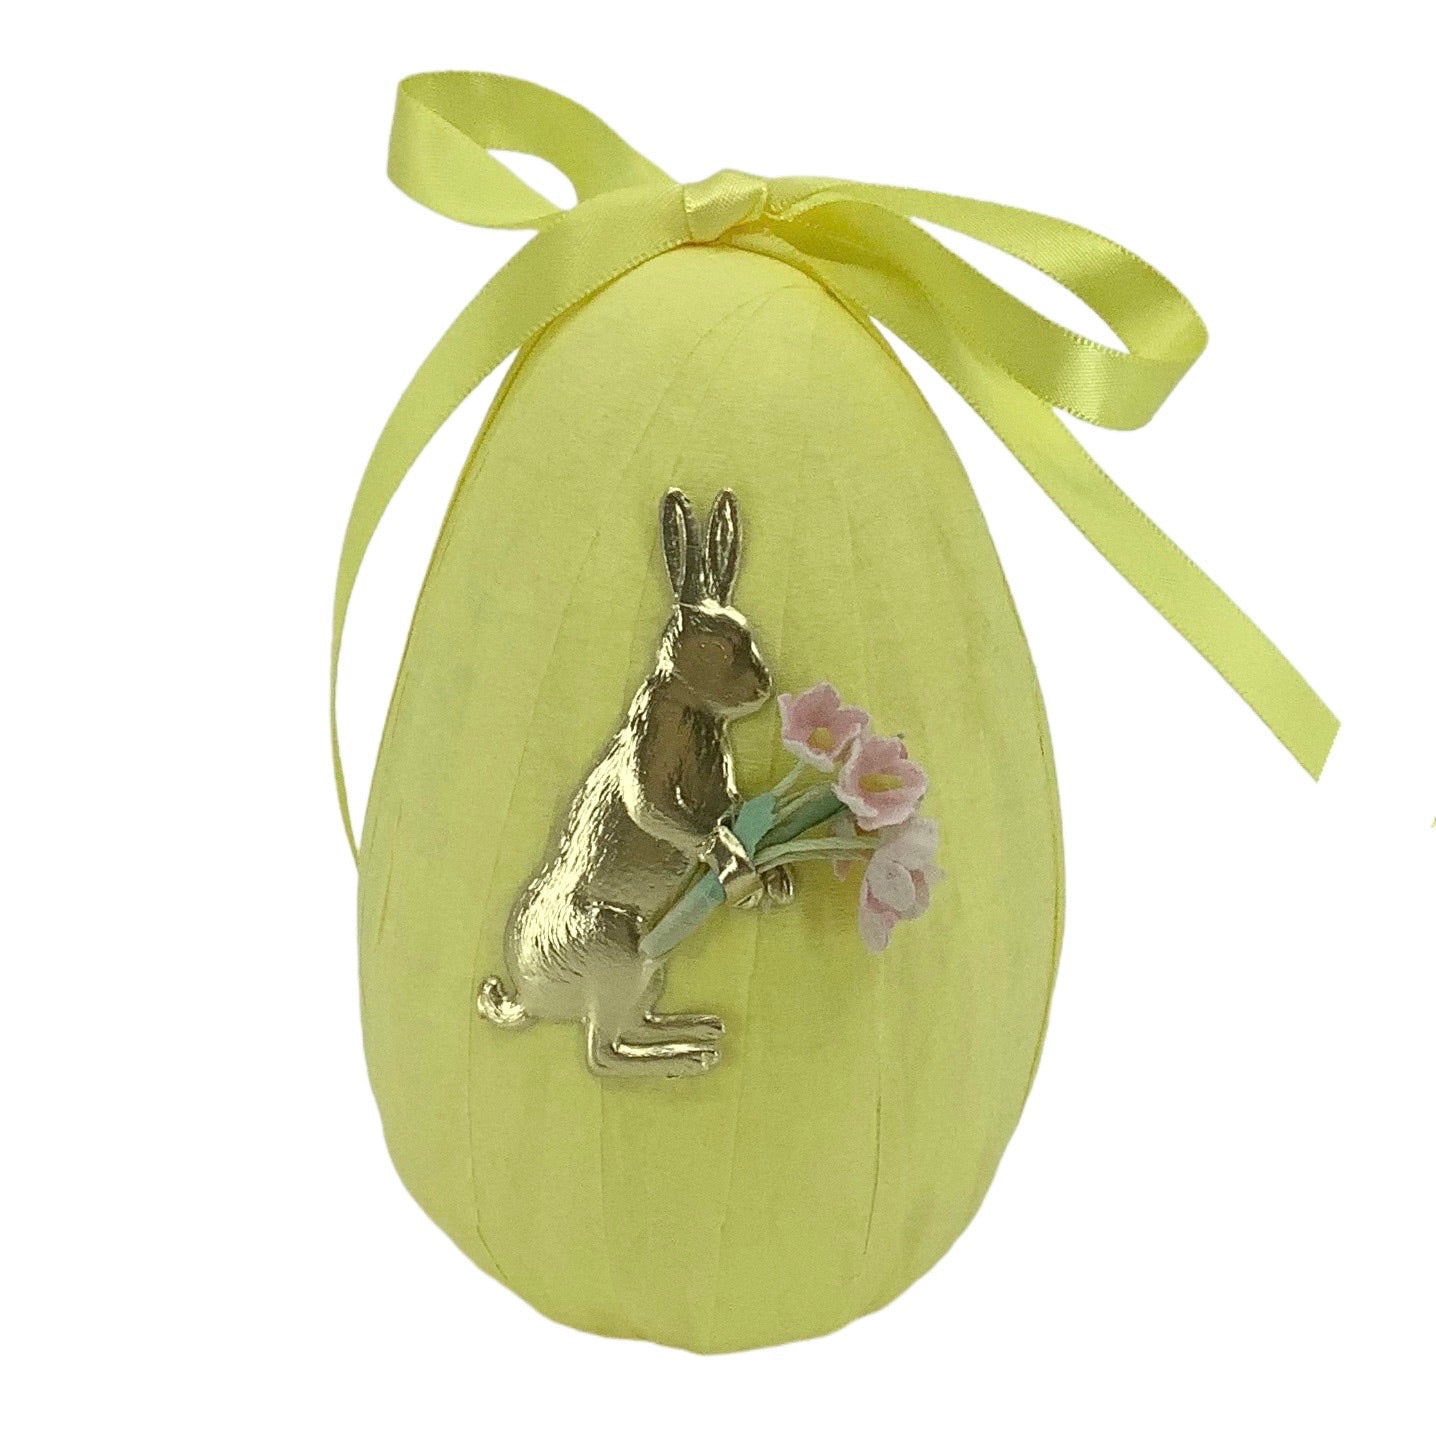 Deluxe Easter Surprise Egg in Yellow